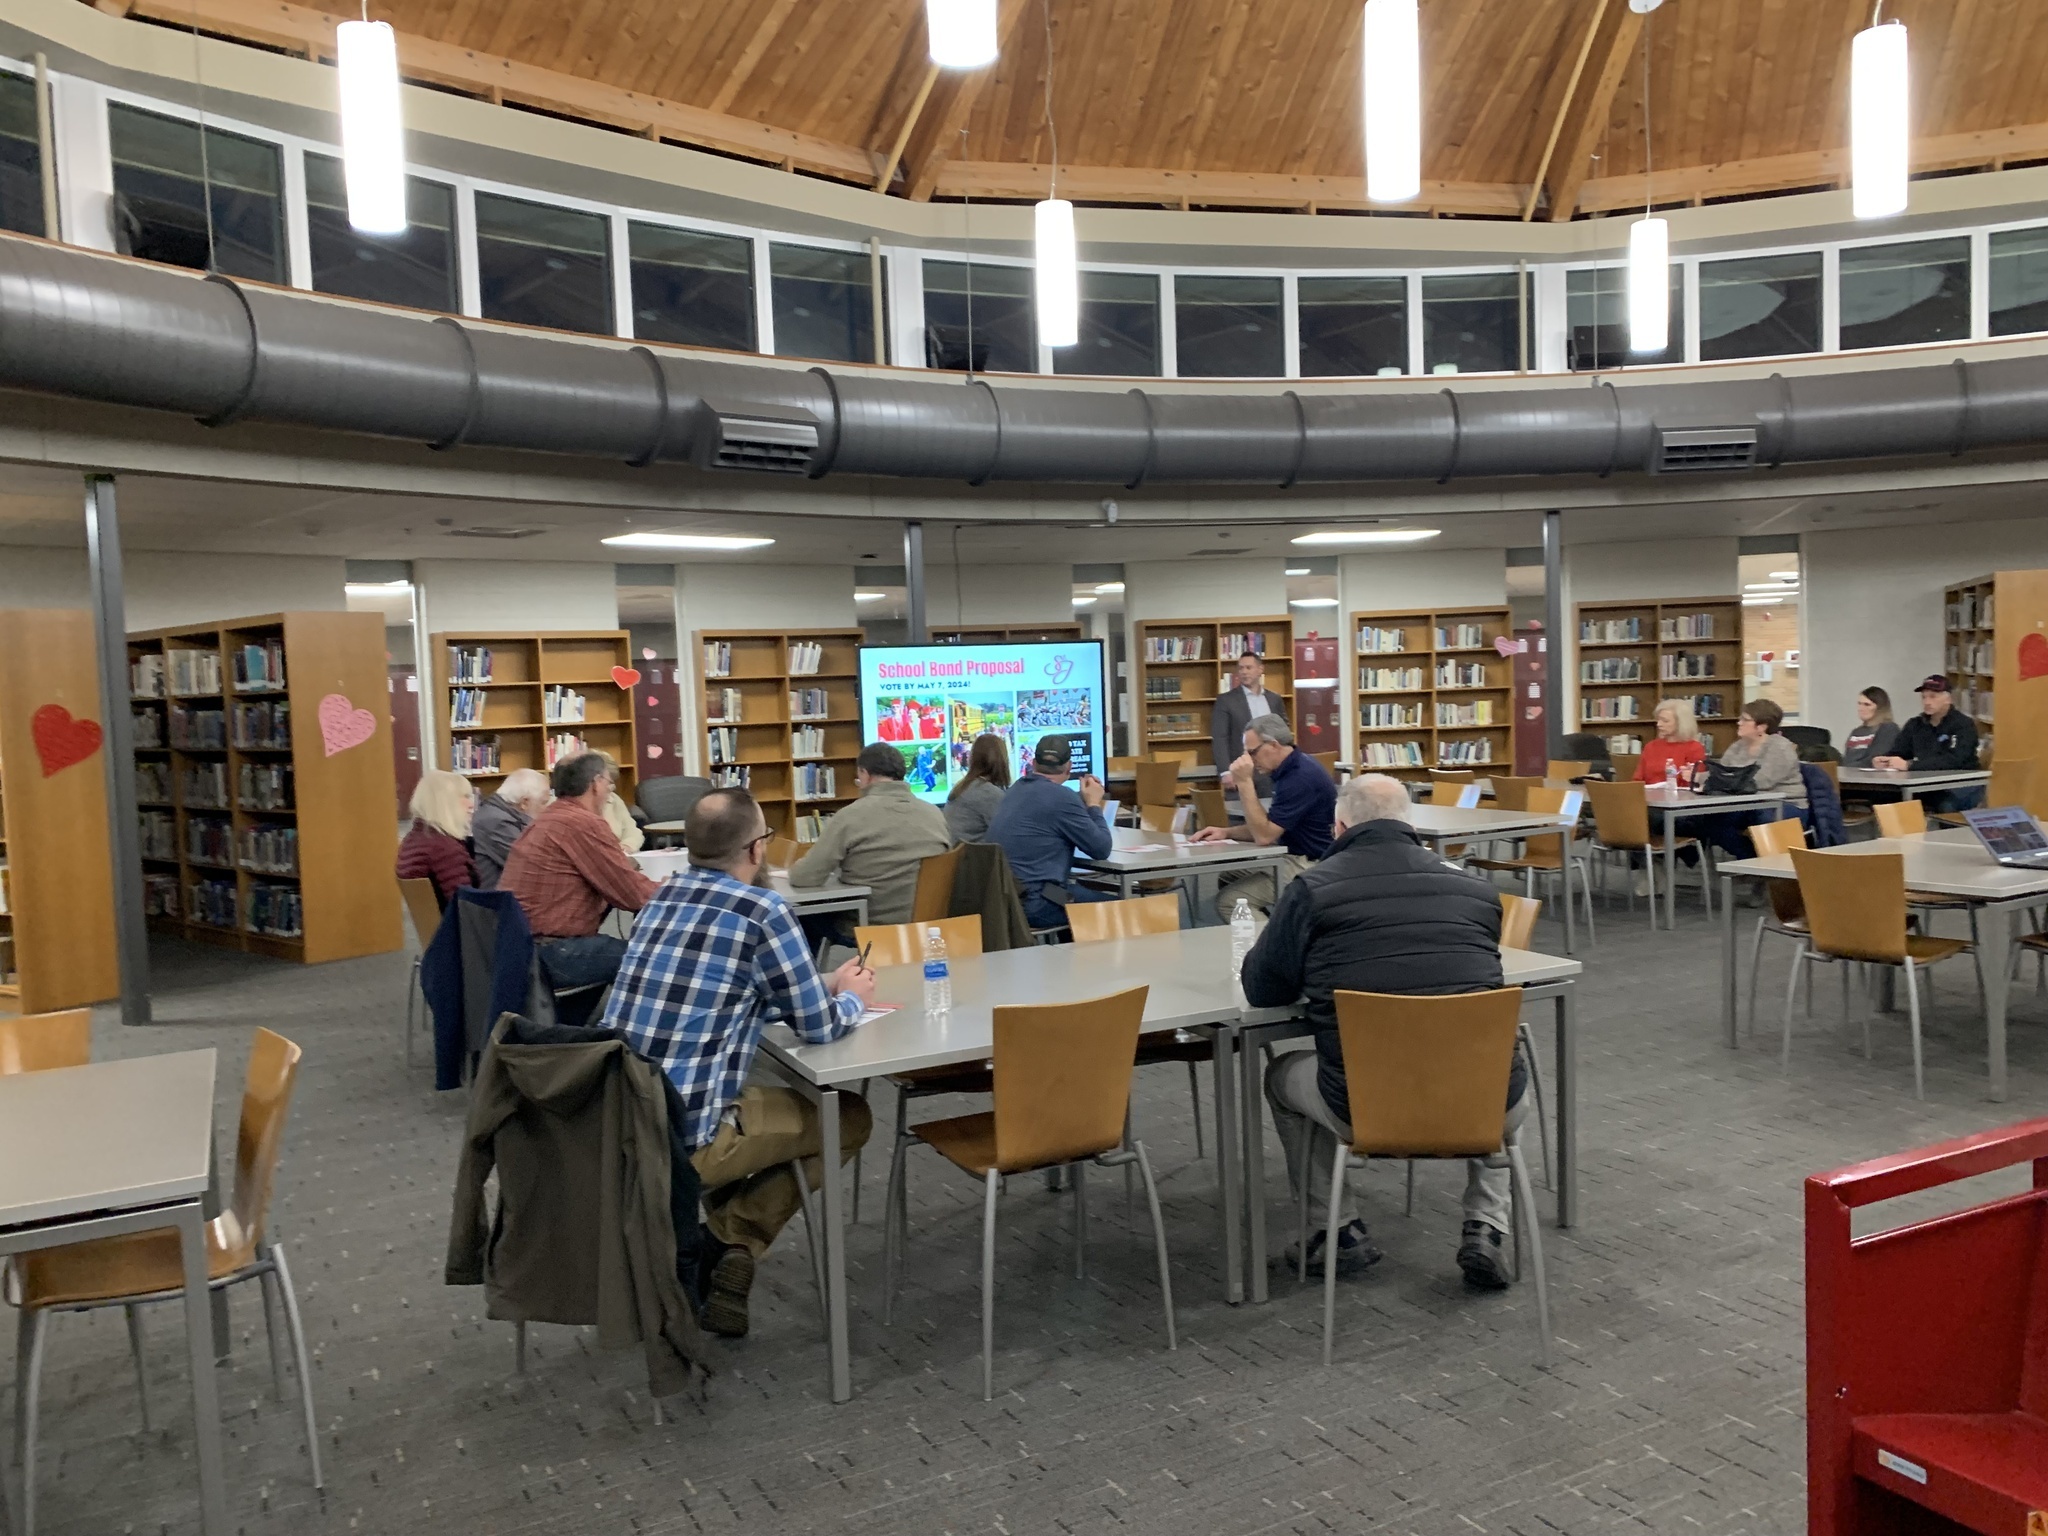 A group of community members gathers in the high school media center as Superintendent Dr. Anthony Berthiaume presents a slide titled "2024 School Bond Proposal"